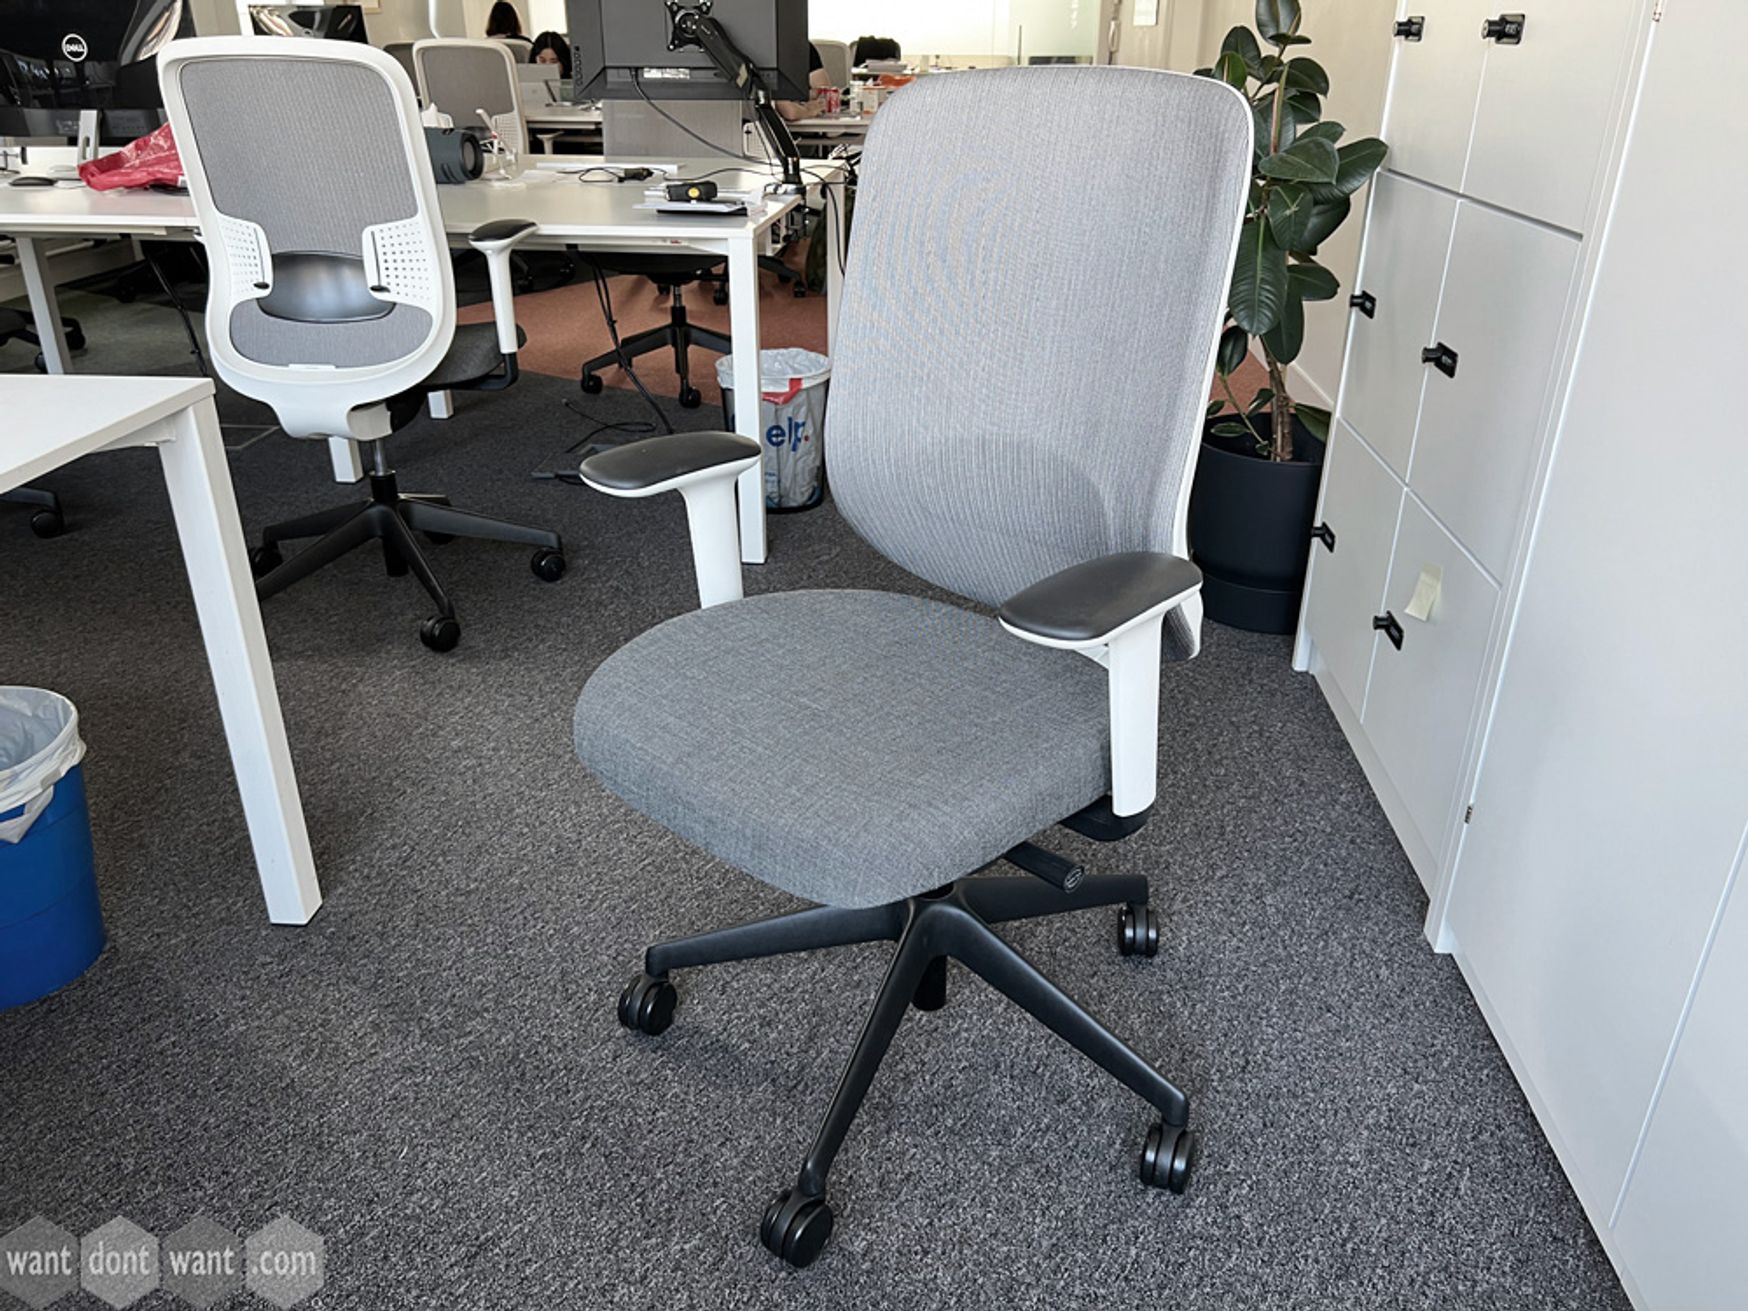 Used Orangebox 'Do' chairs with mesh backs and white frame